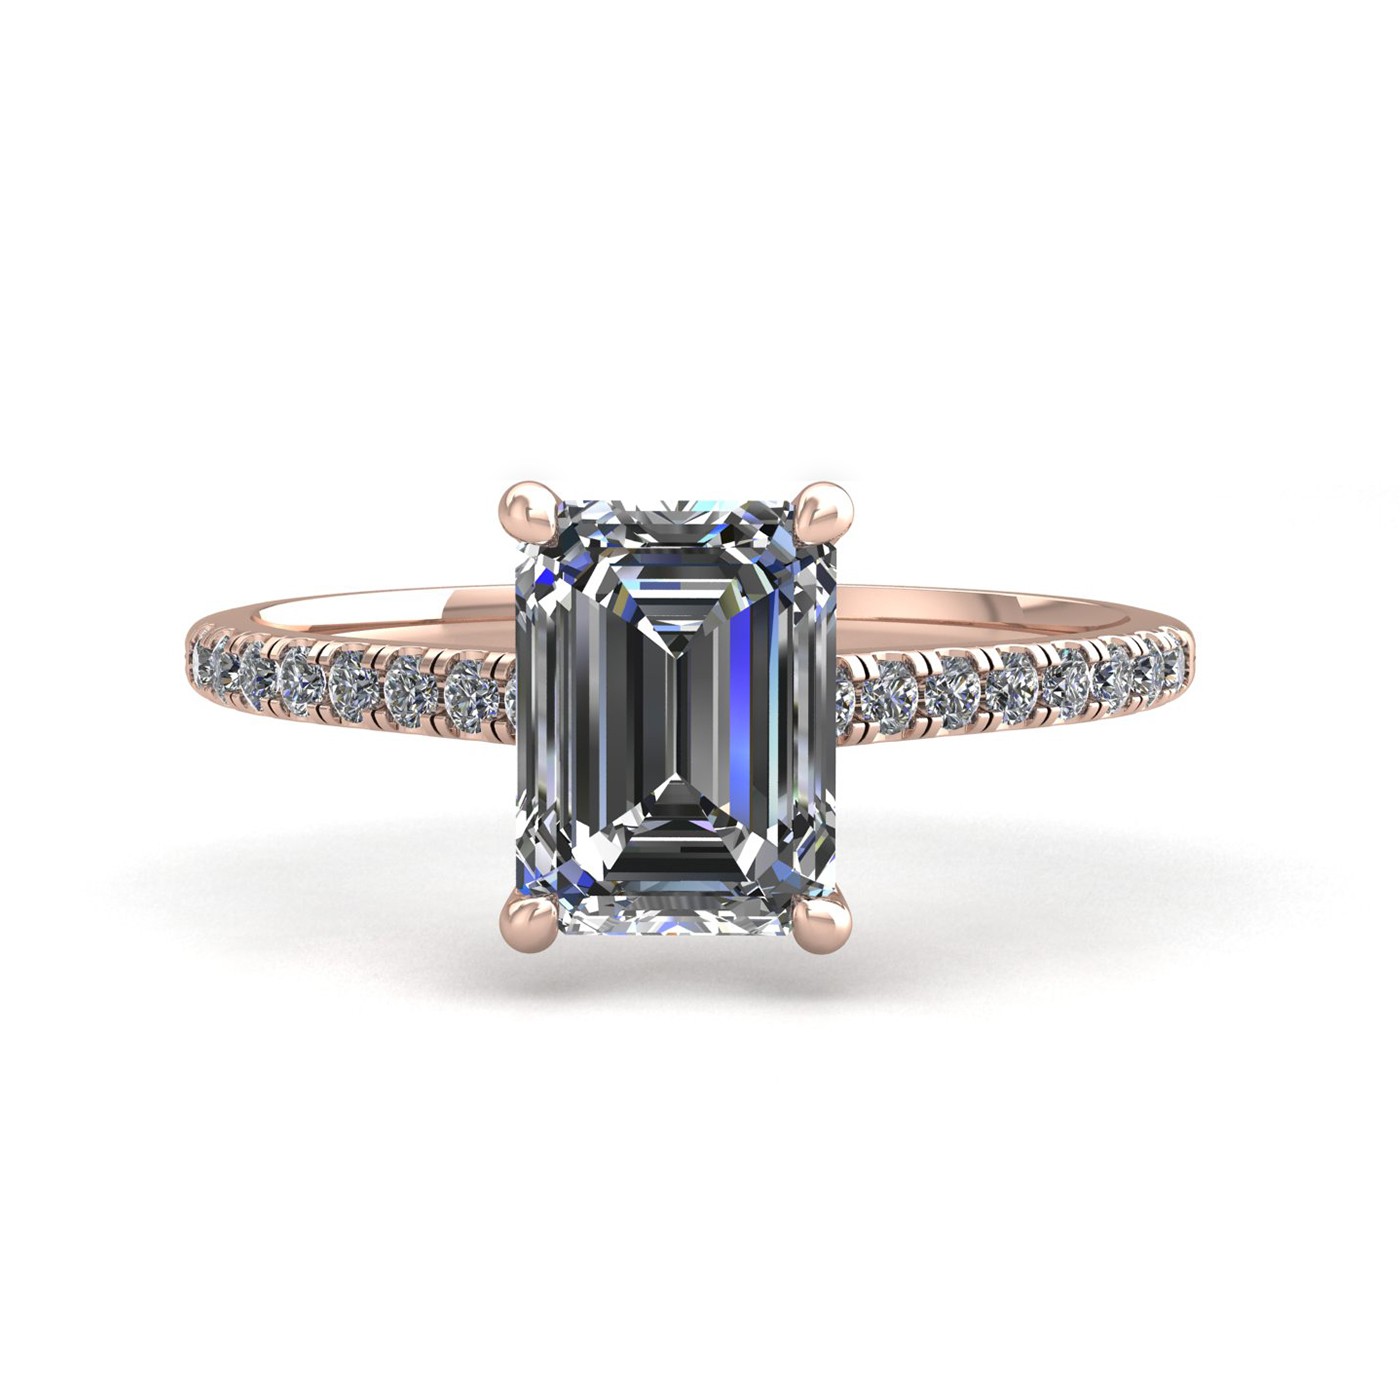 18k rose gold 1.2ct 4 prongs emerald cut diamond engagement ring with whisper thin pavÉ set band